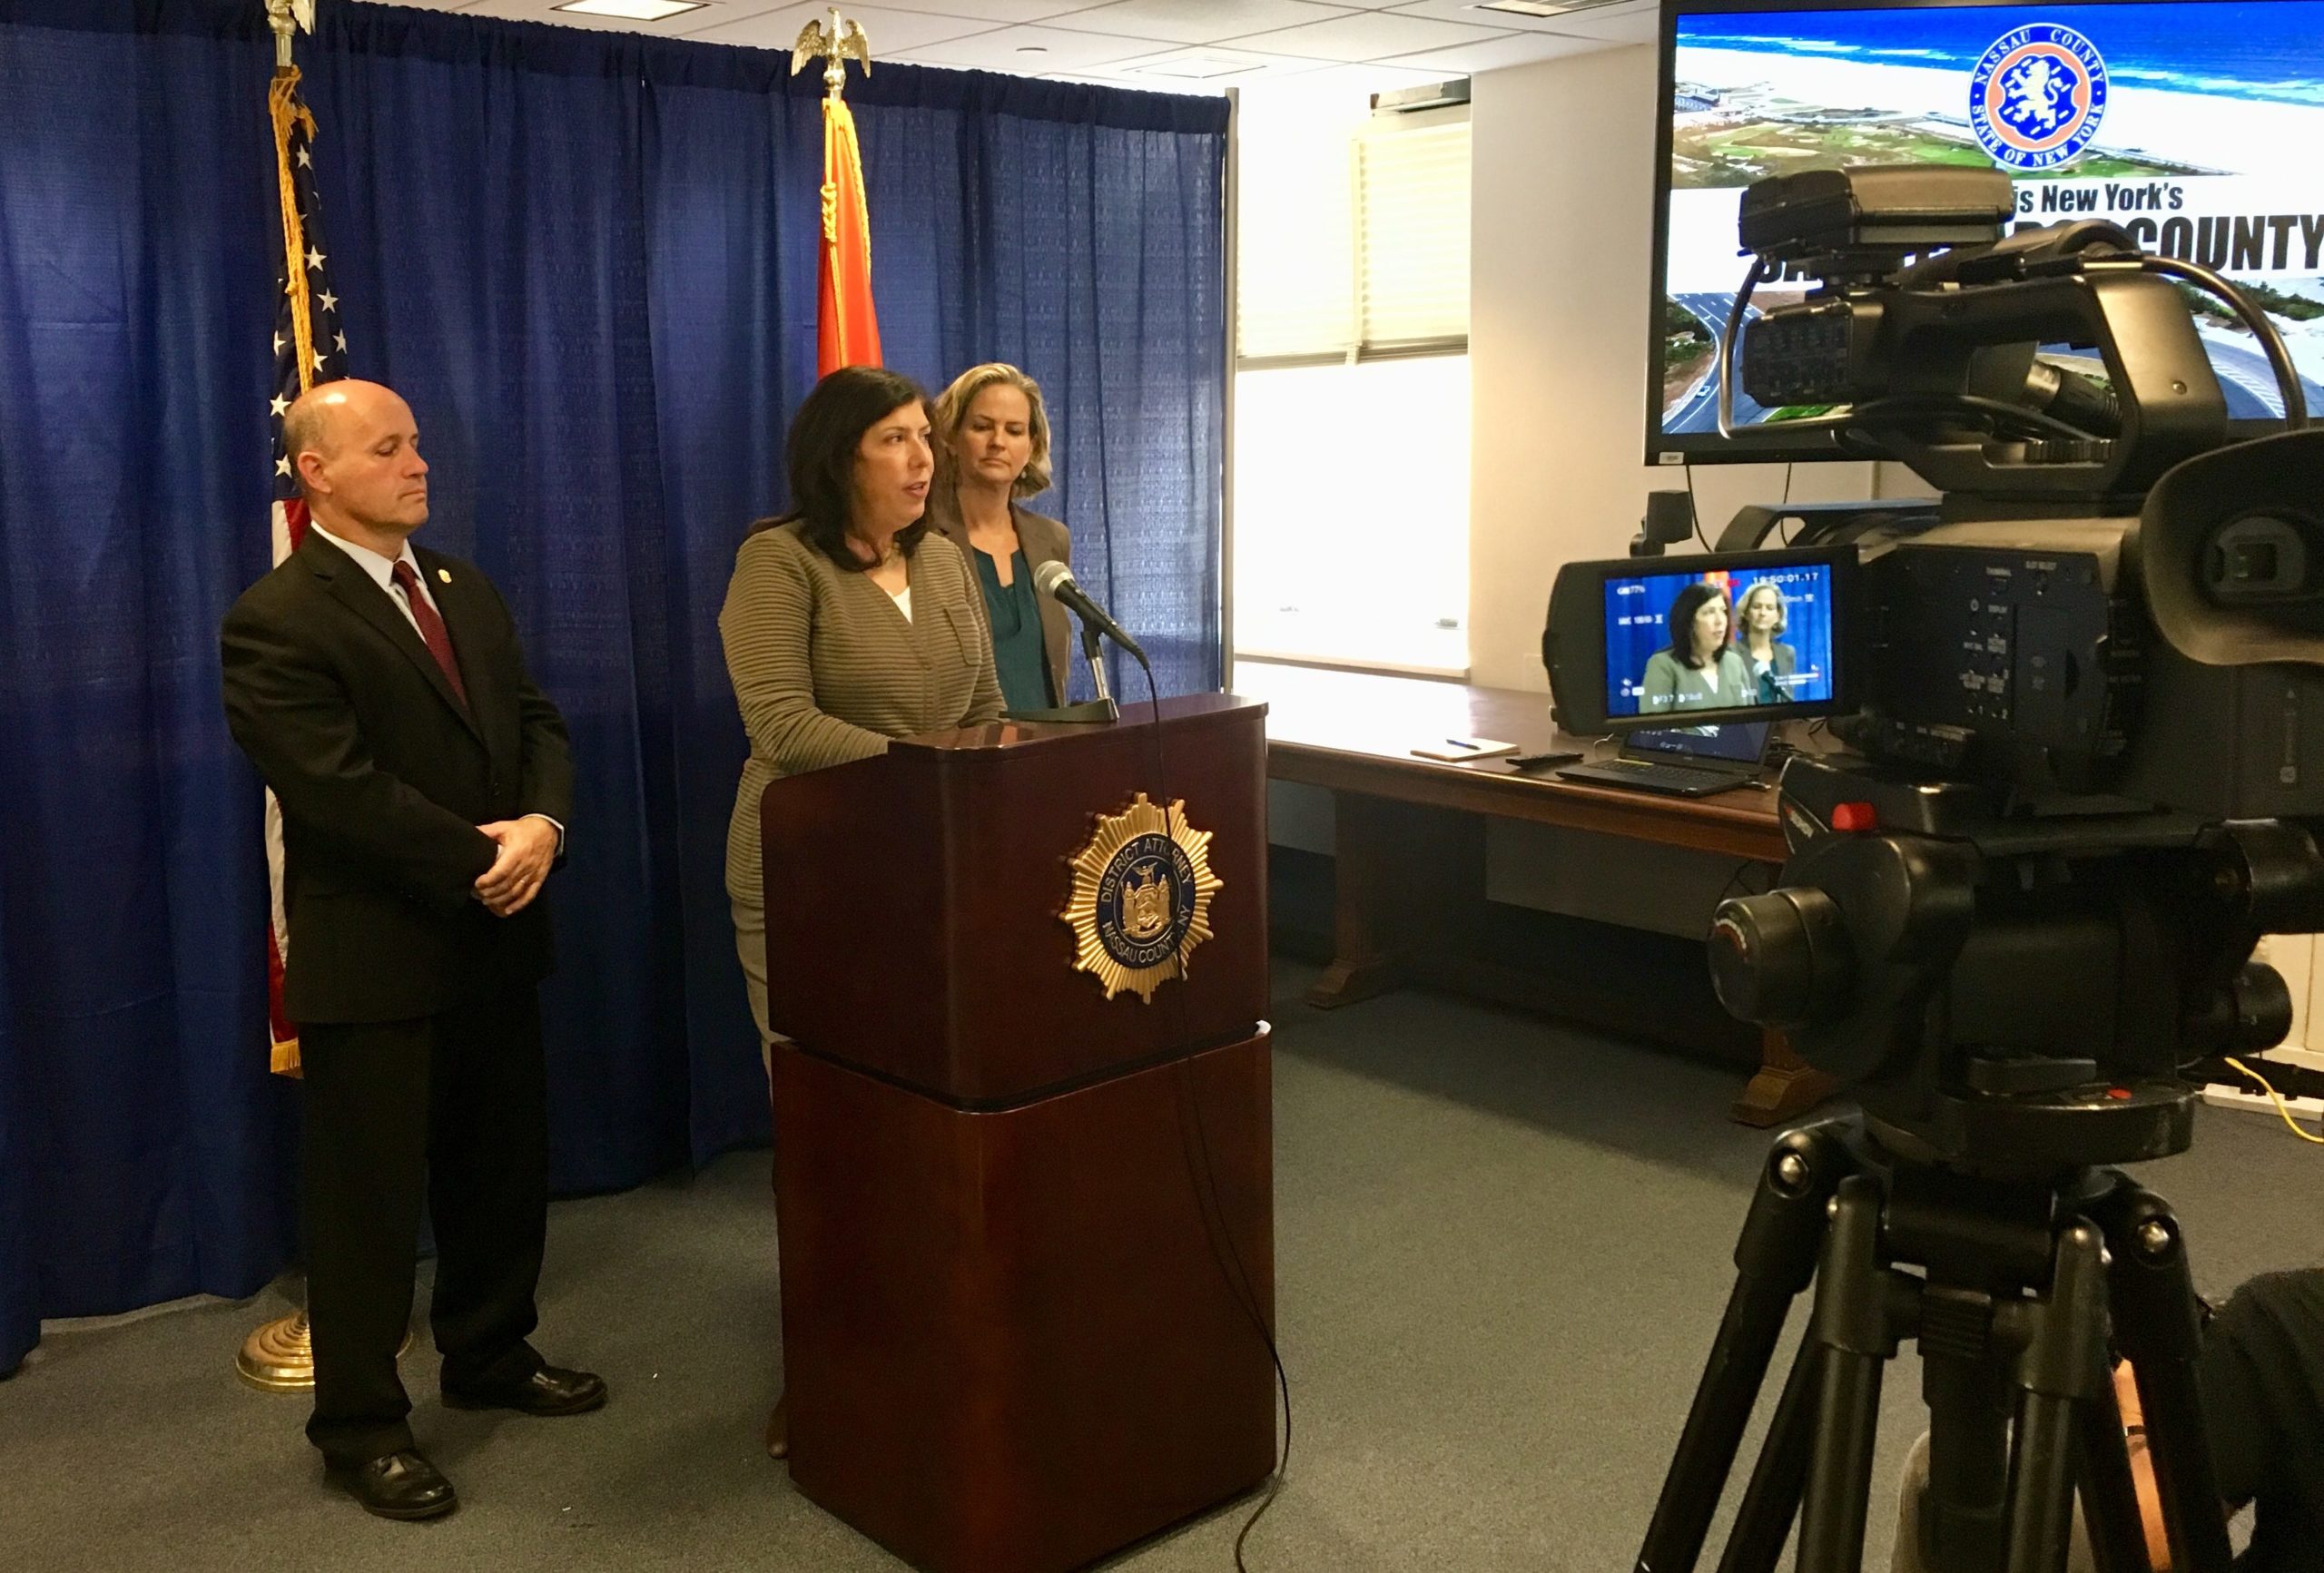 Nassau County DA Madeline Singas speaks about the decrease in crime in Nassau County since 2013. (Photo courtesy of the Nassau County District Attorney’s Office)